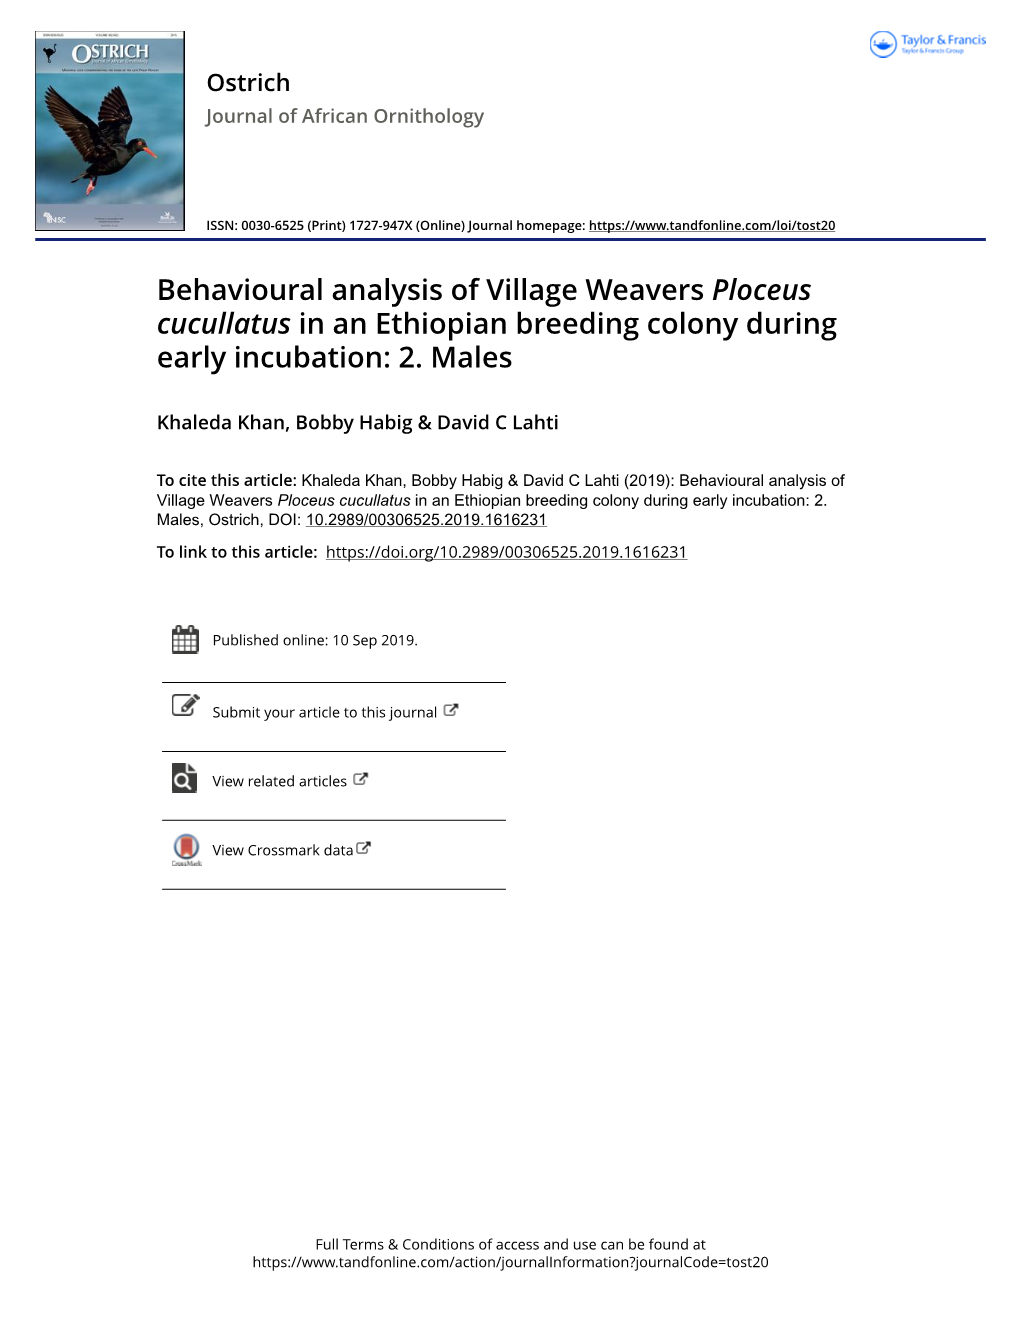 Behavioural Analysis of Village Weavers Ploceus Cucullatus in an Ethiopian Breeding Colony During Early Incubation: 2